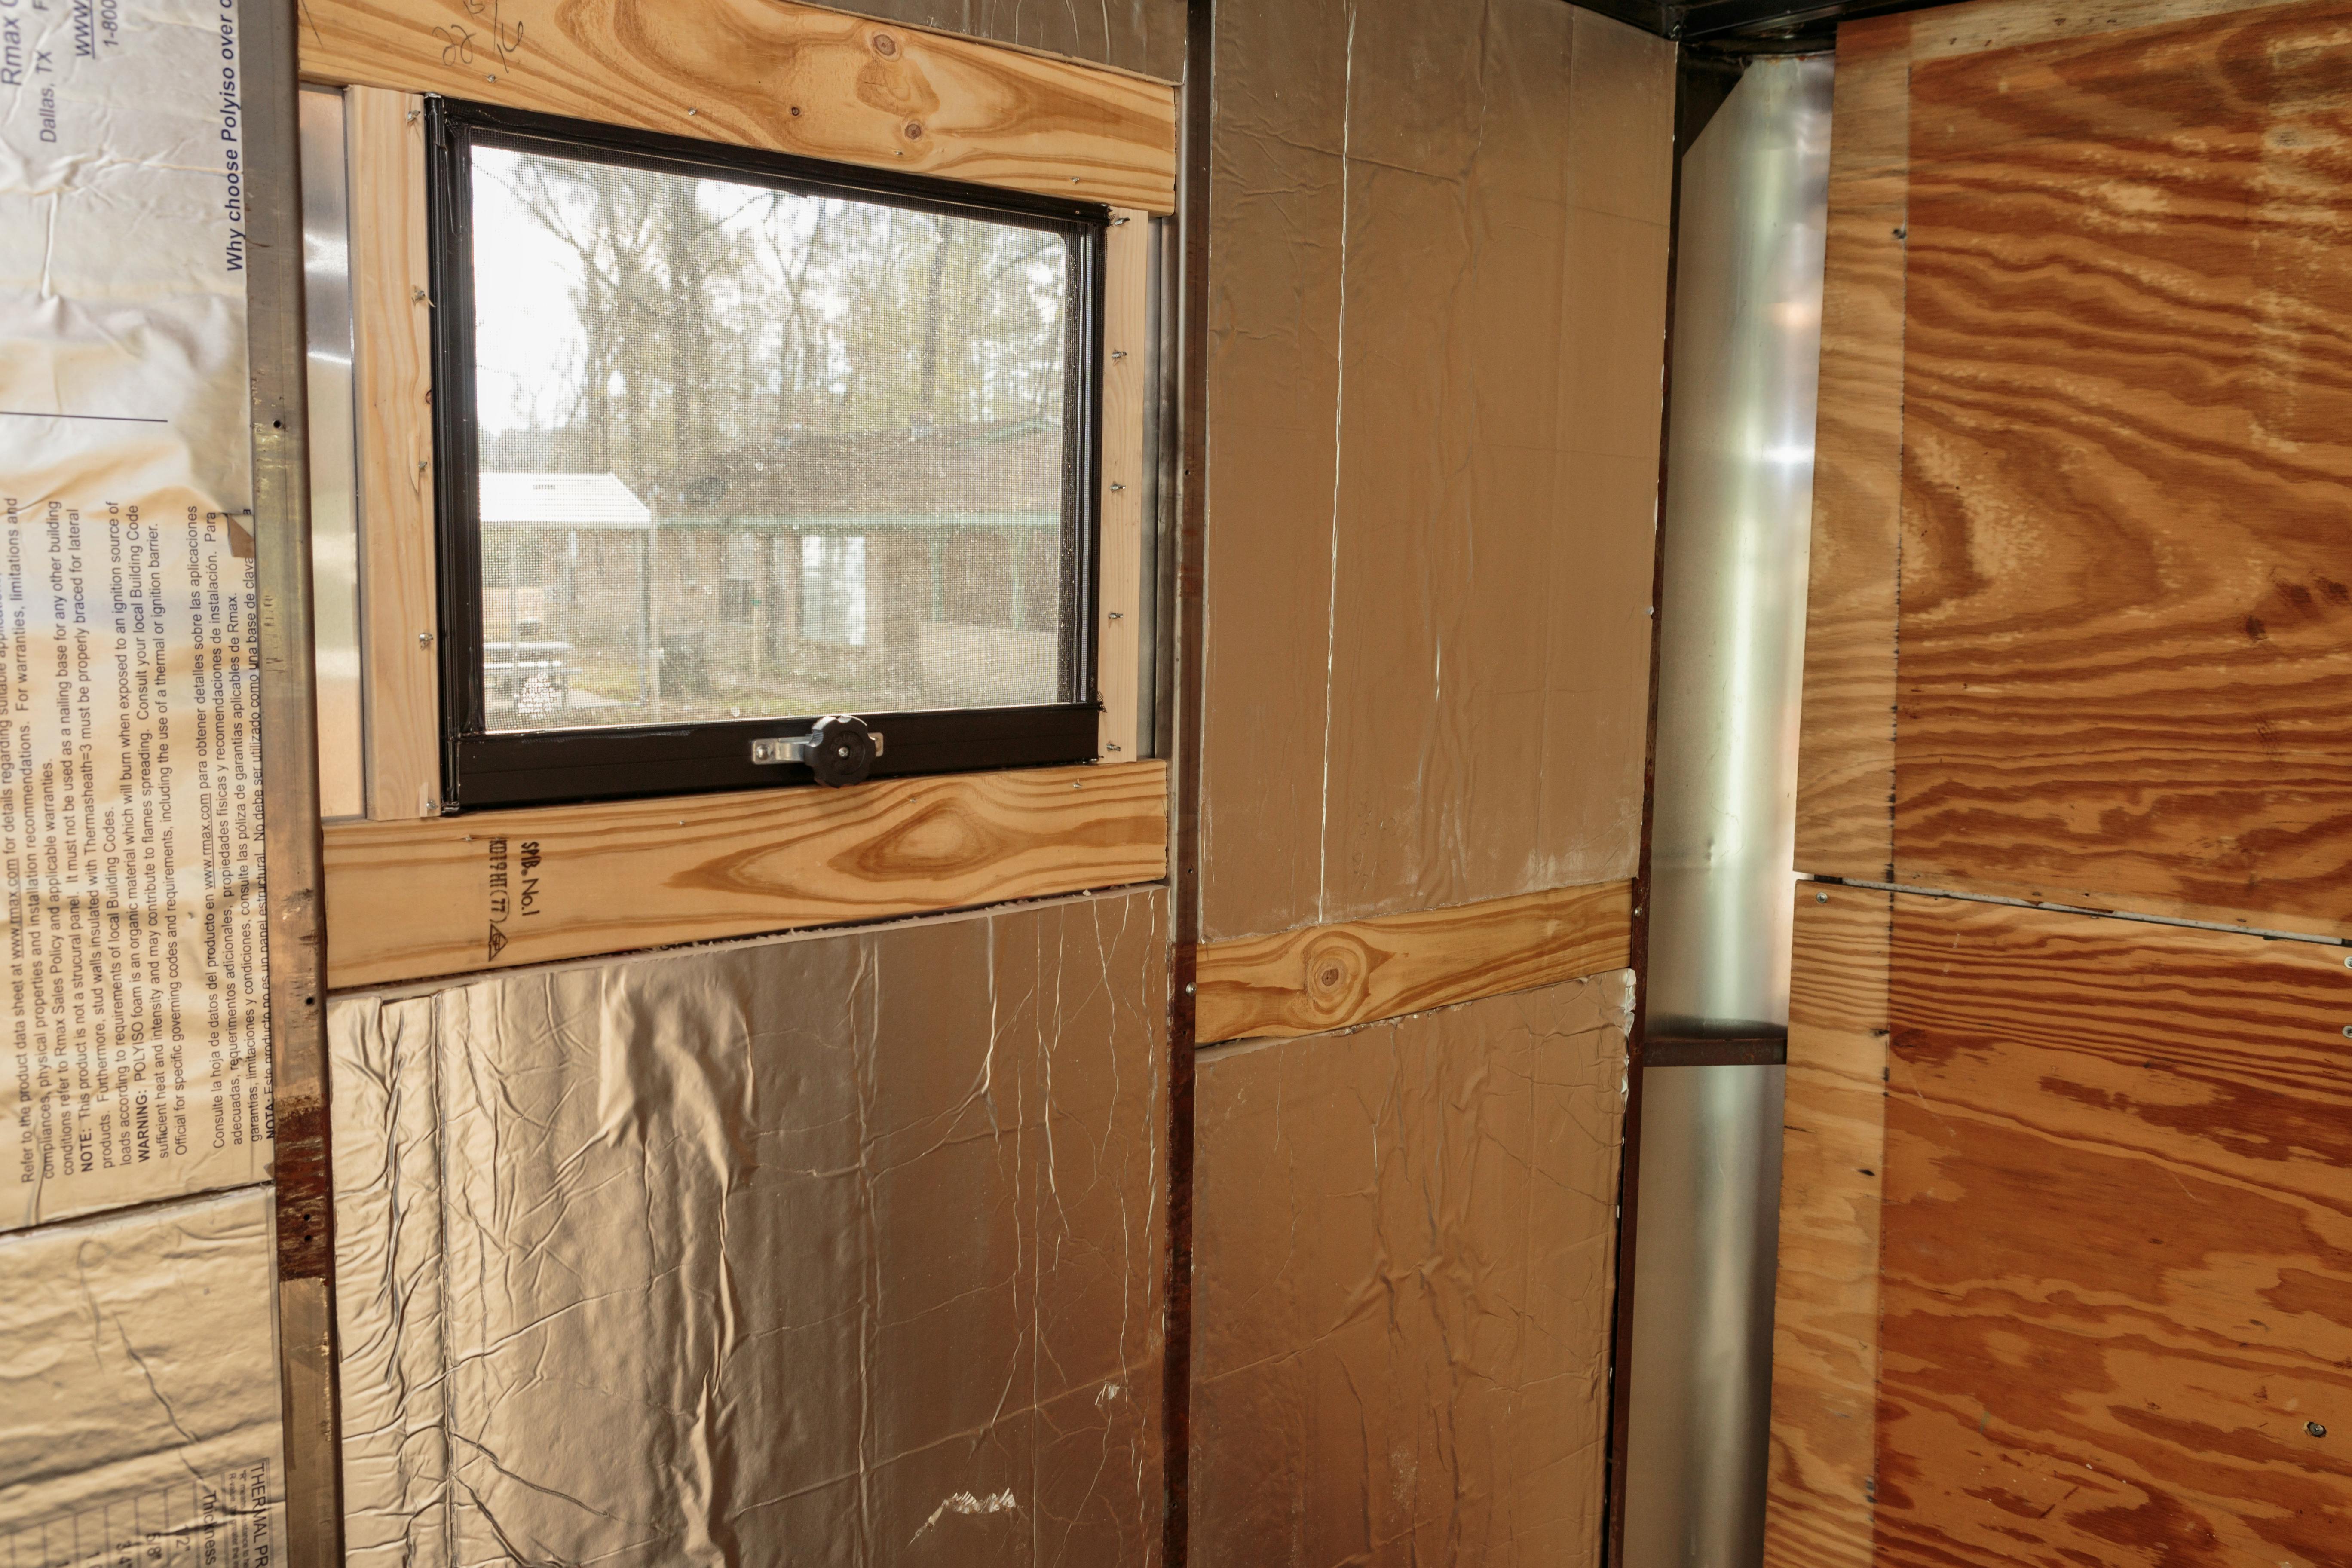 A window in a cargo trailer. It is surrounded by wood and insulation.